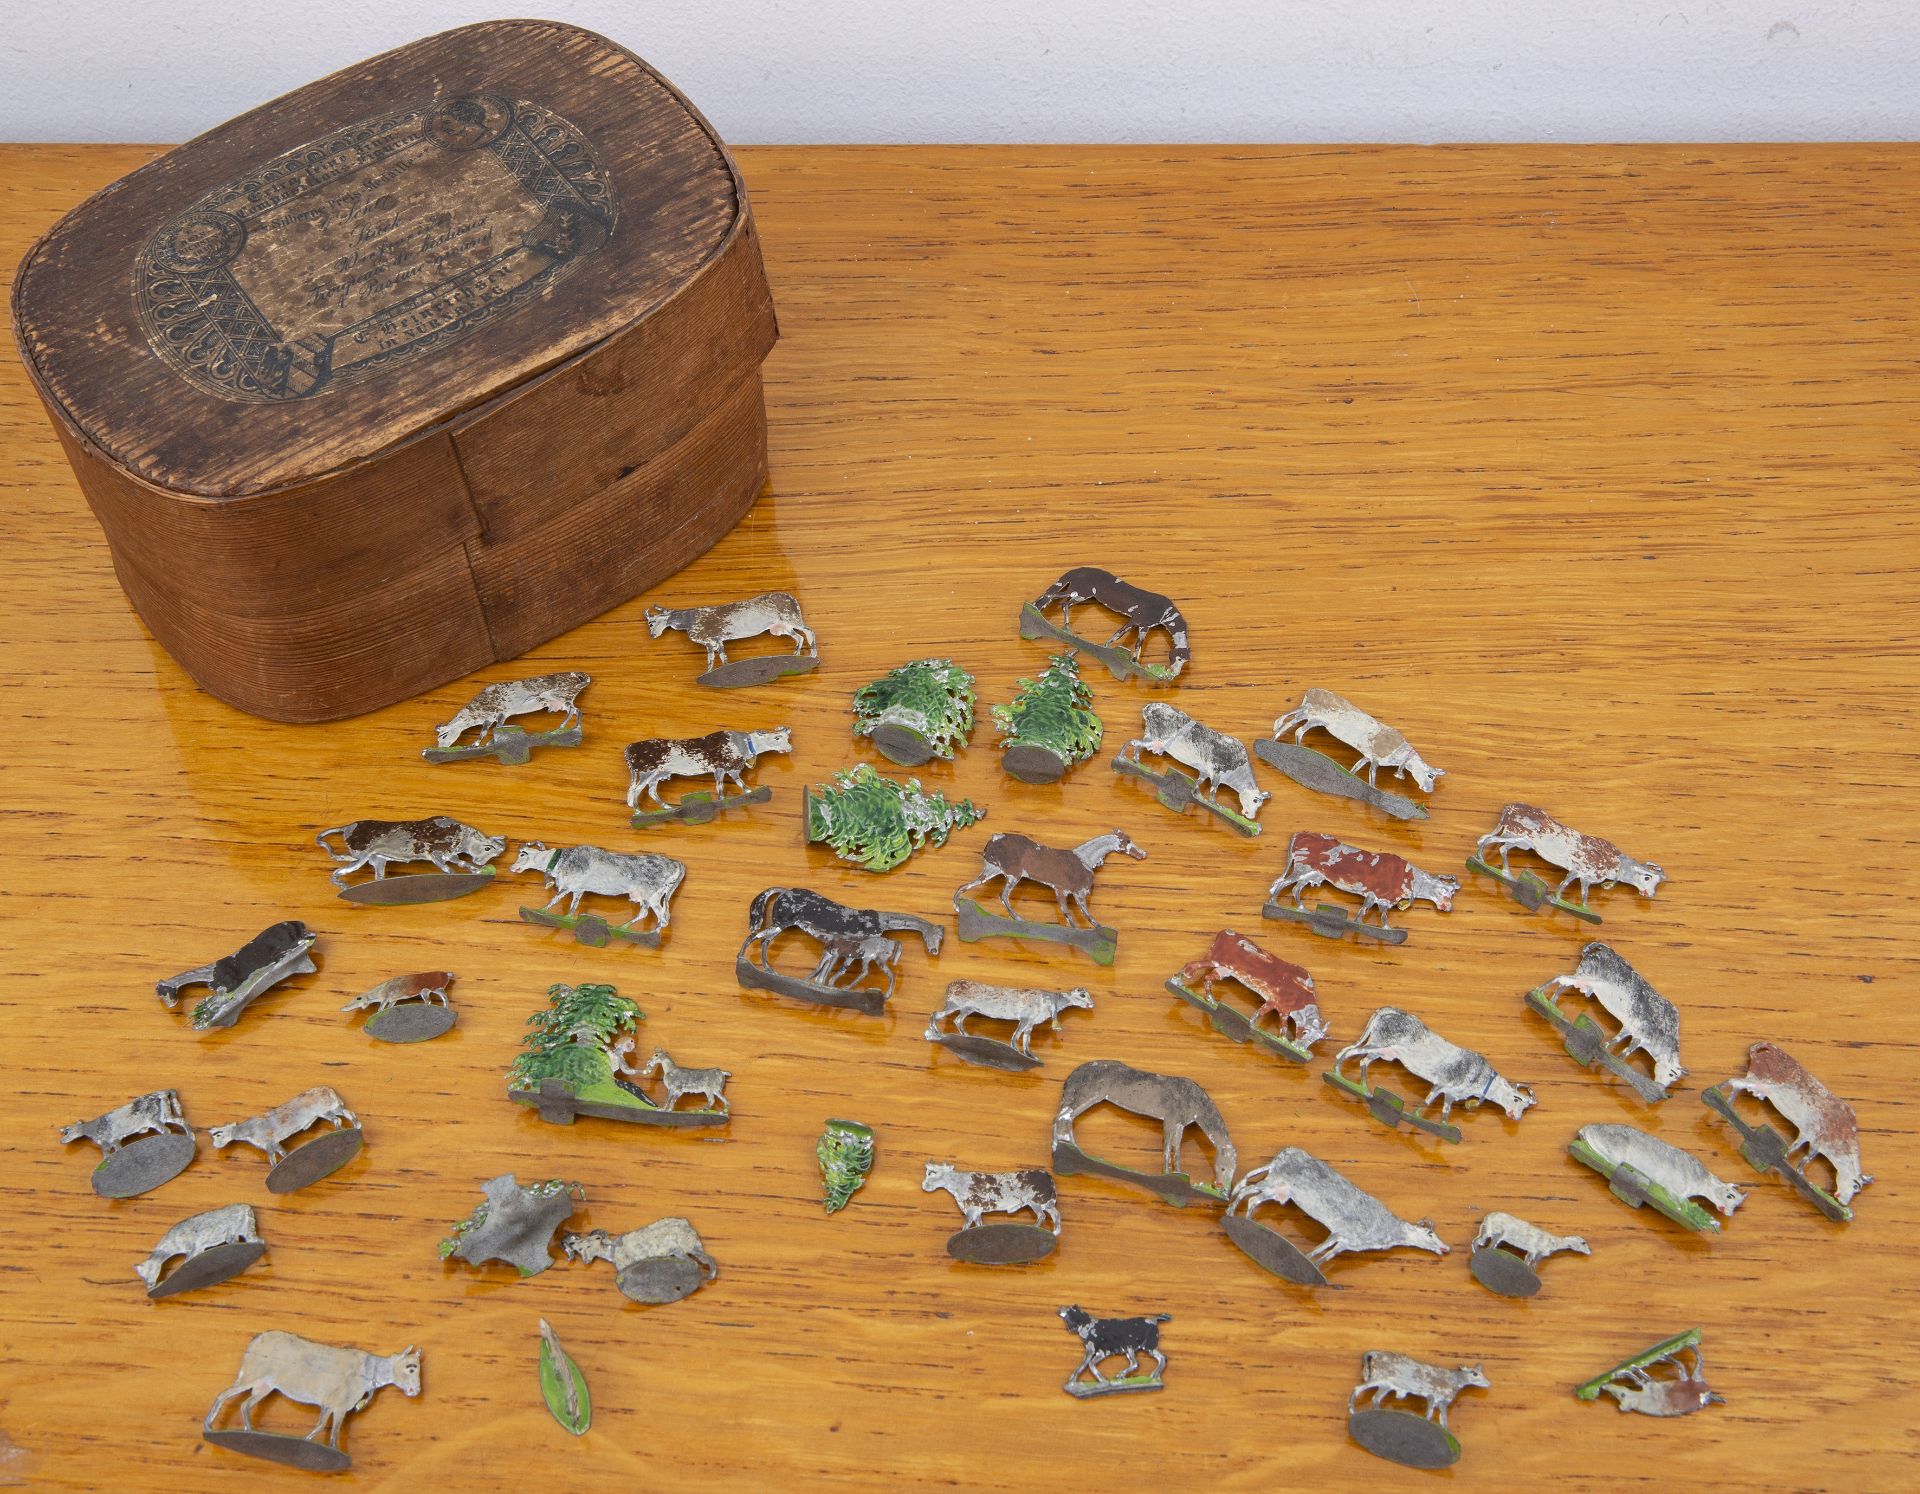 Collection of lead painted cows and related civilian figures, in original wooden box with paper